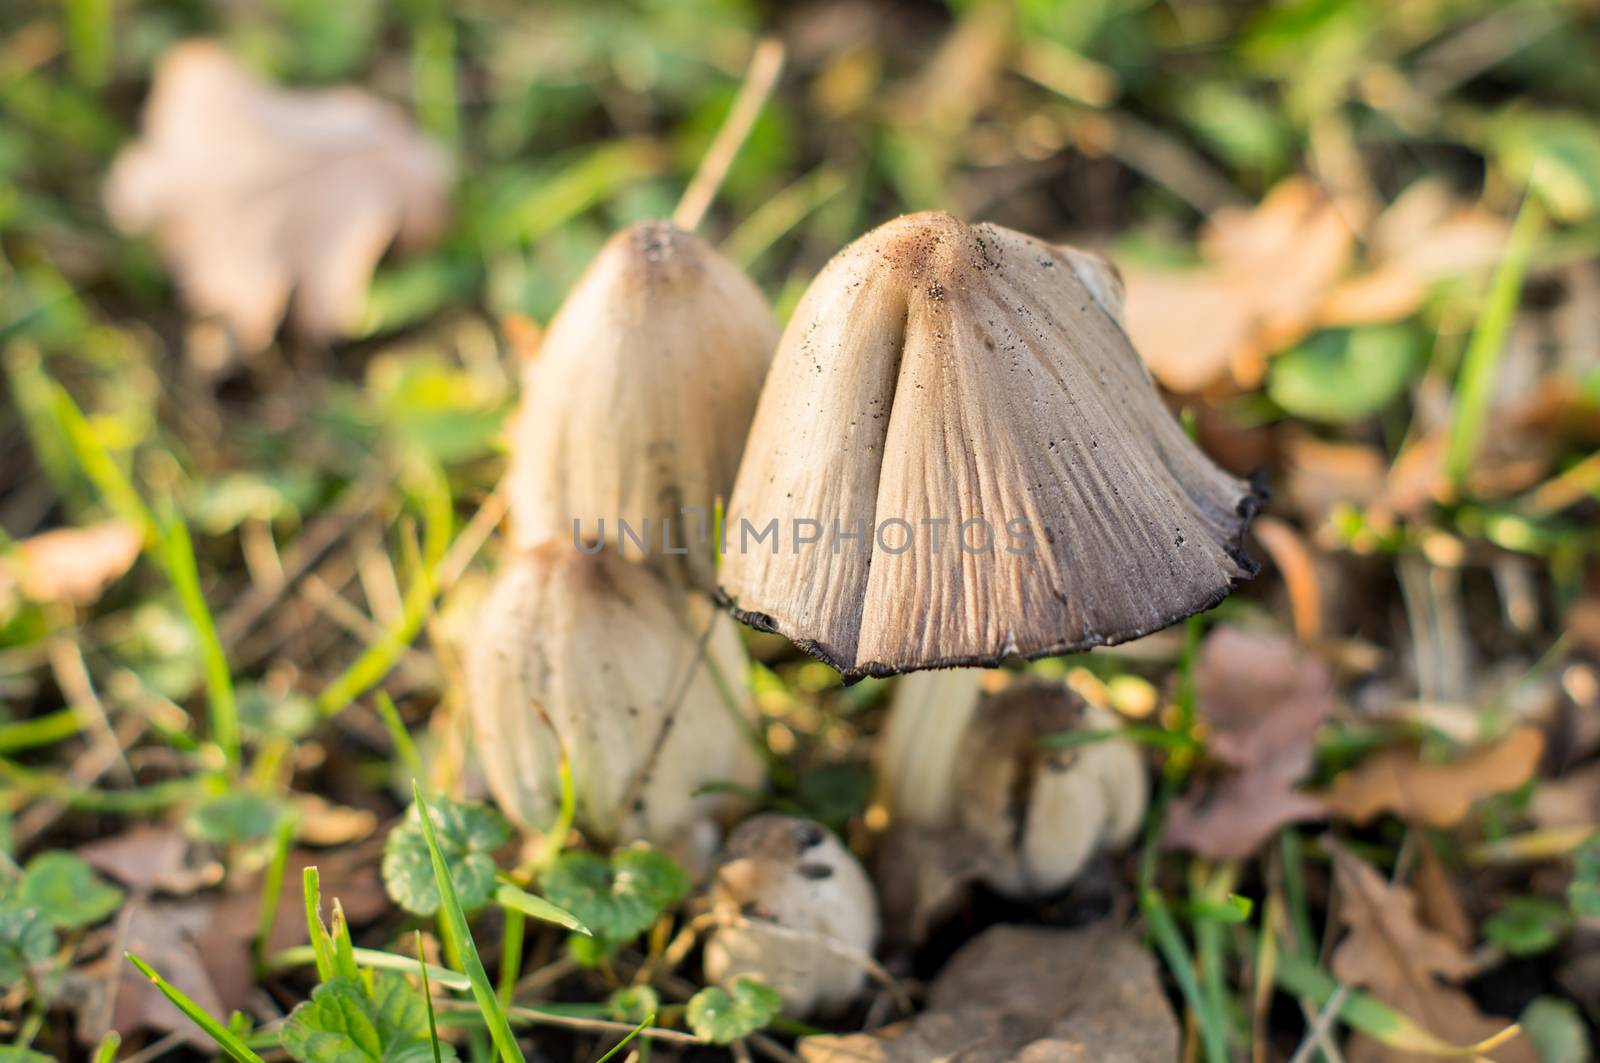 poisonous mushroom. For your commercial and editorial use.